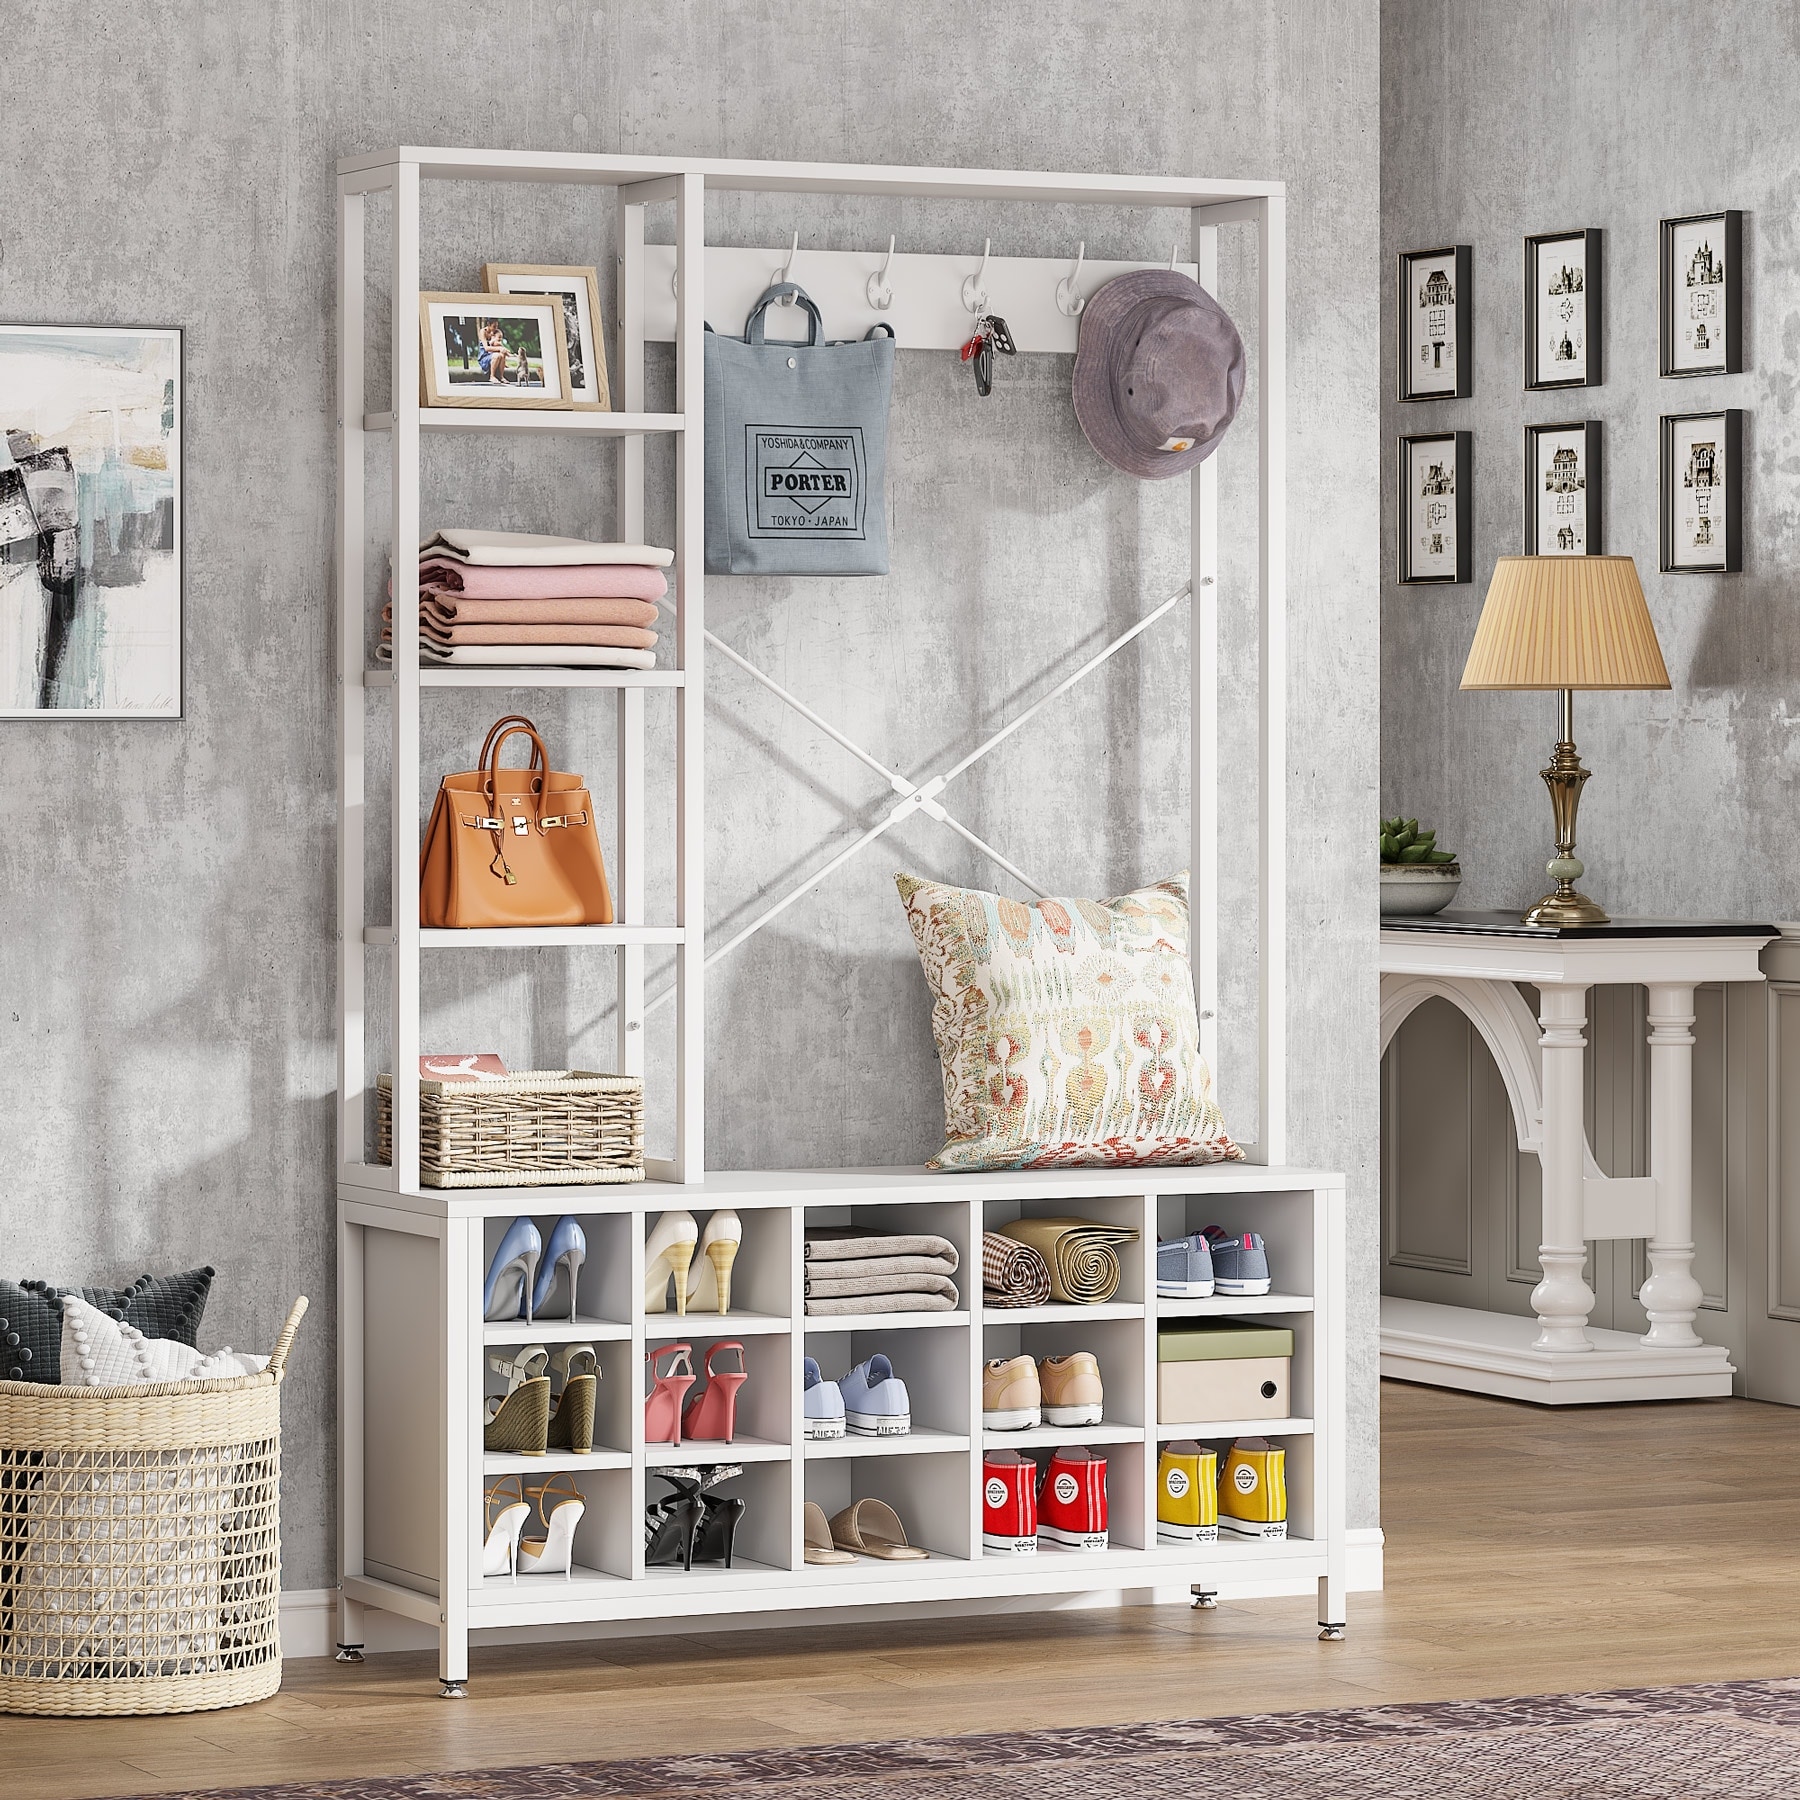 https://ak1.ostkcdn.com/images/products/is/images/direct/c4e25ce091c2160d6ec898e47ee472ac2afe5642/Entryway-Hall-Tree-with-Bench-and-Shoe-Storage-Coat-Rack.jpg